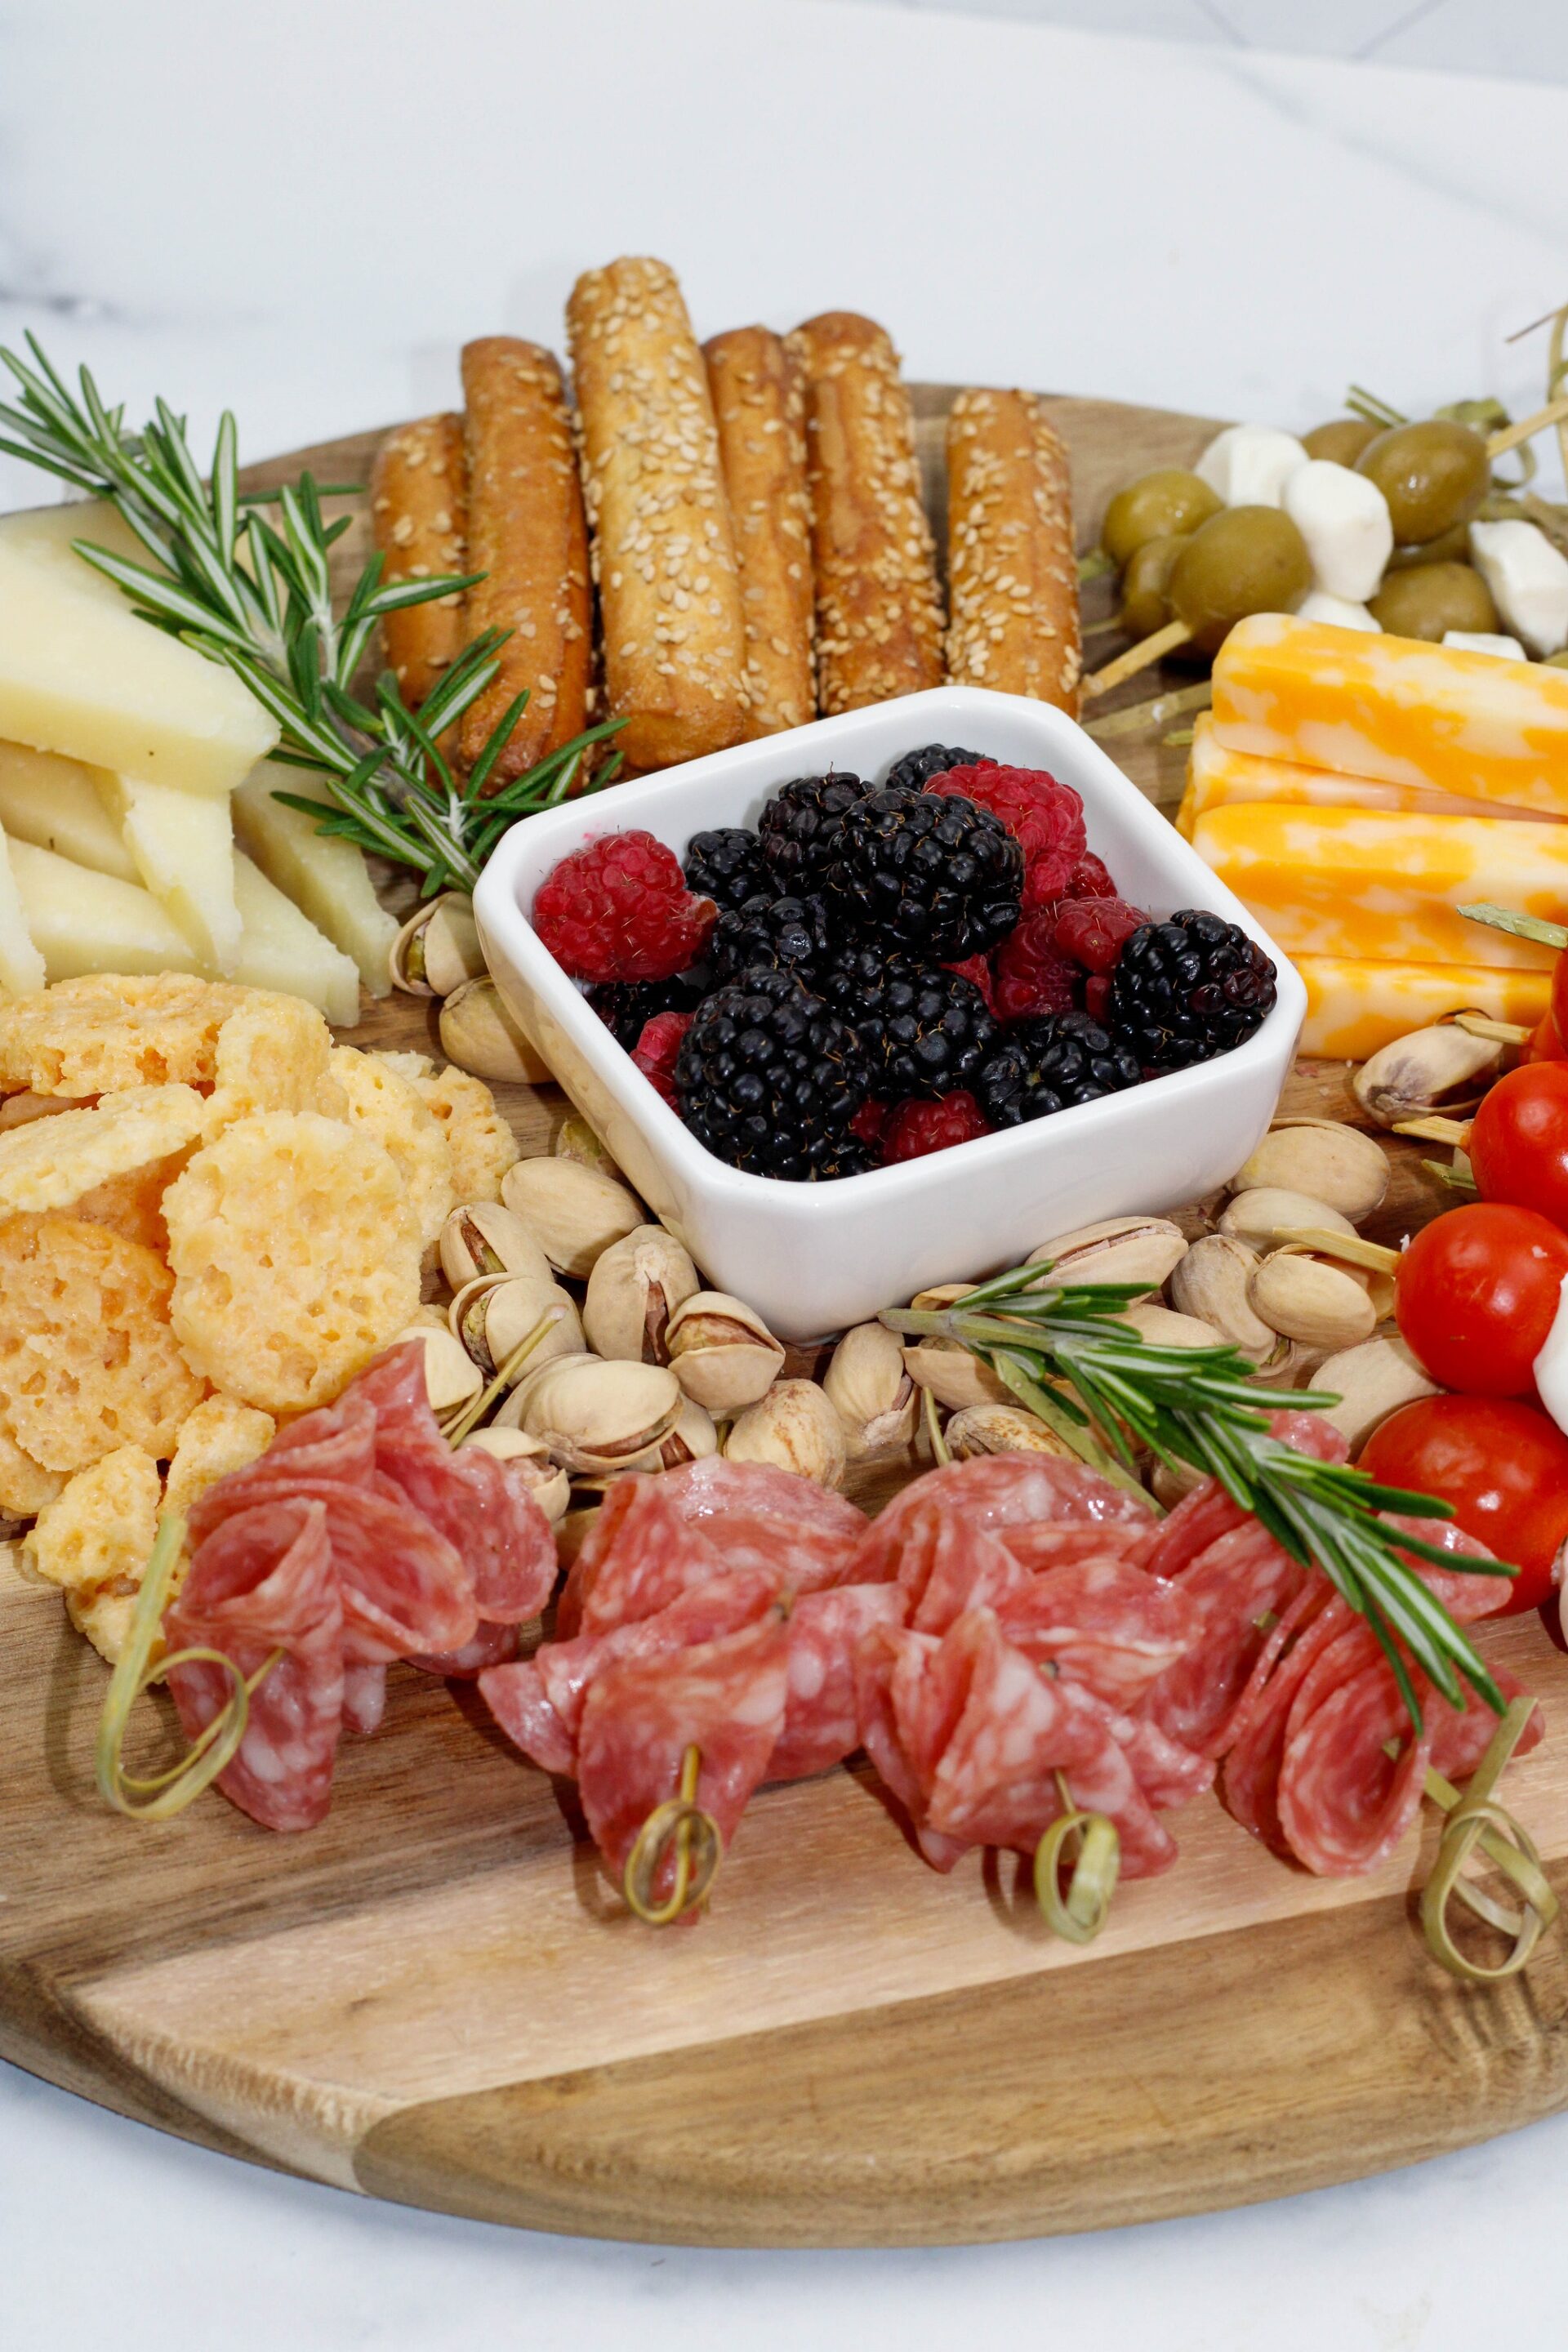 Charcuterie components on a wooden board.